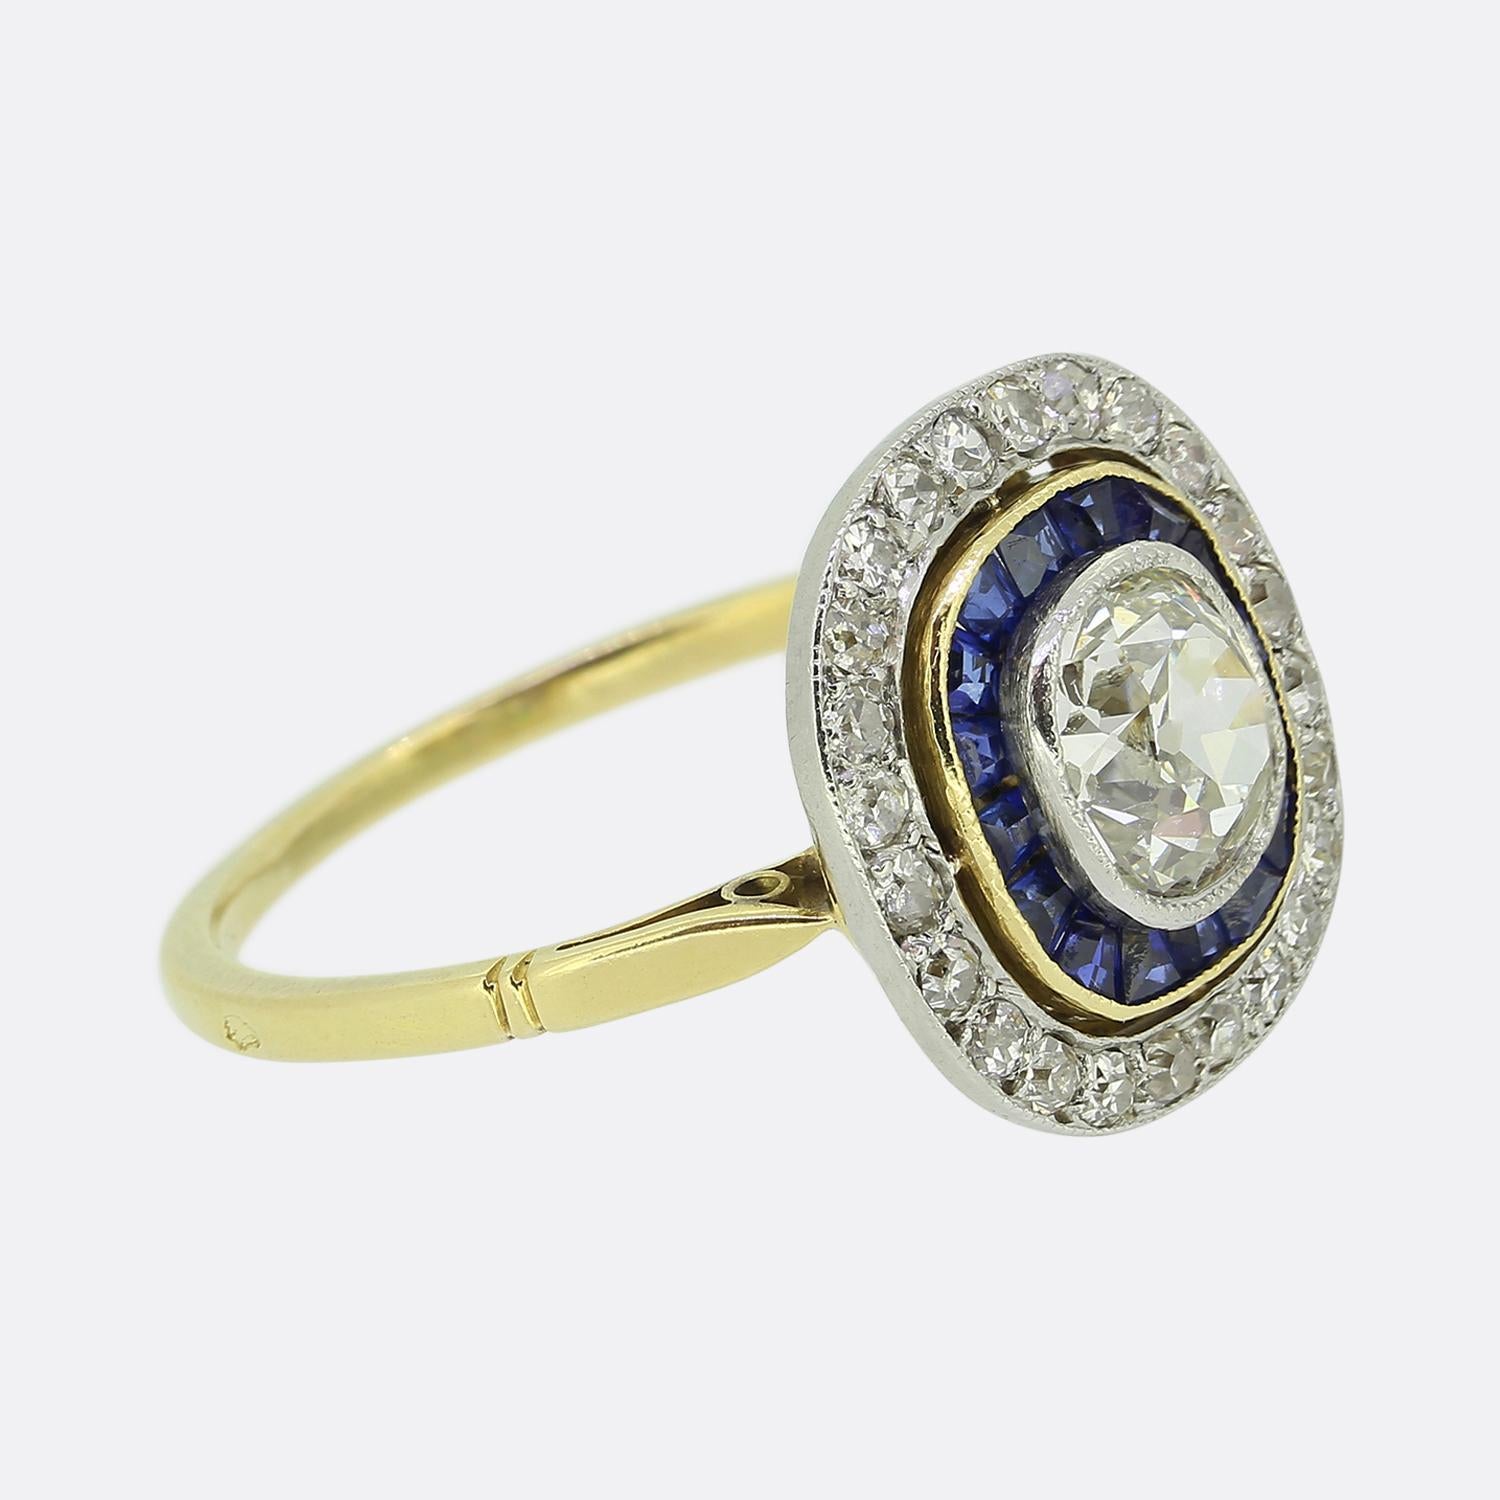 Antique Cushion Cut French Art Deco 0.70 Carat Diamond and Sapphire Ring For Sale